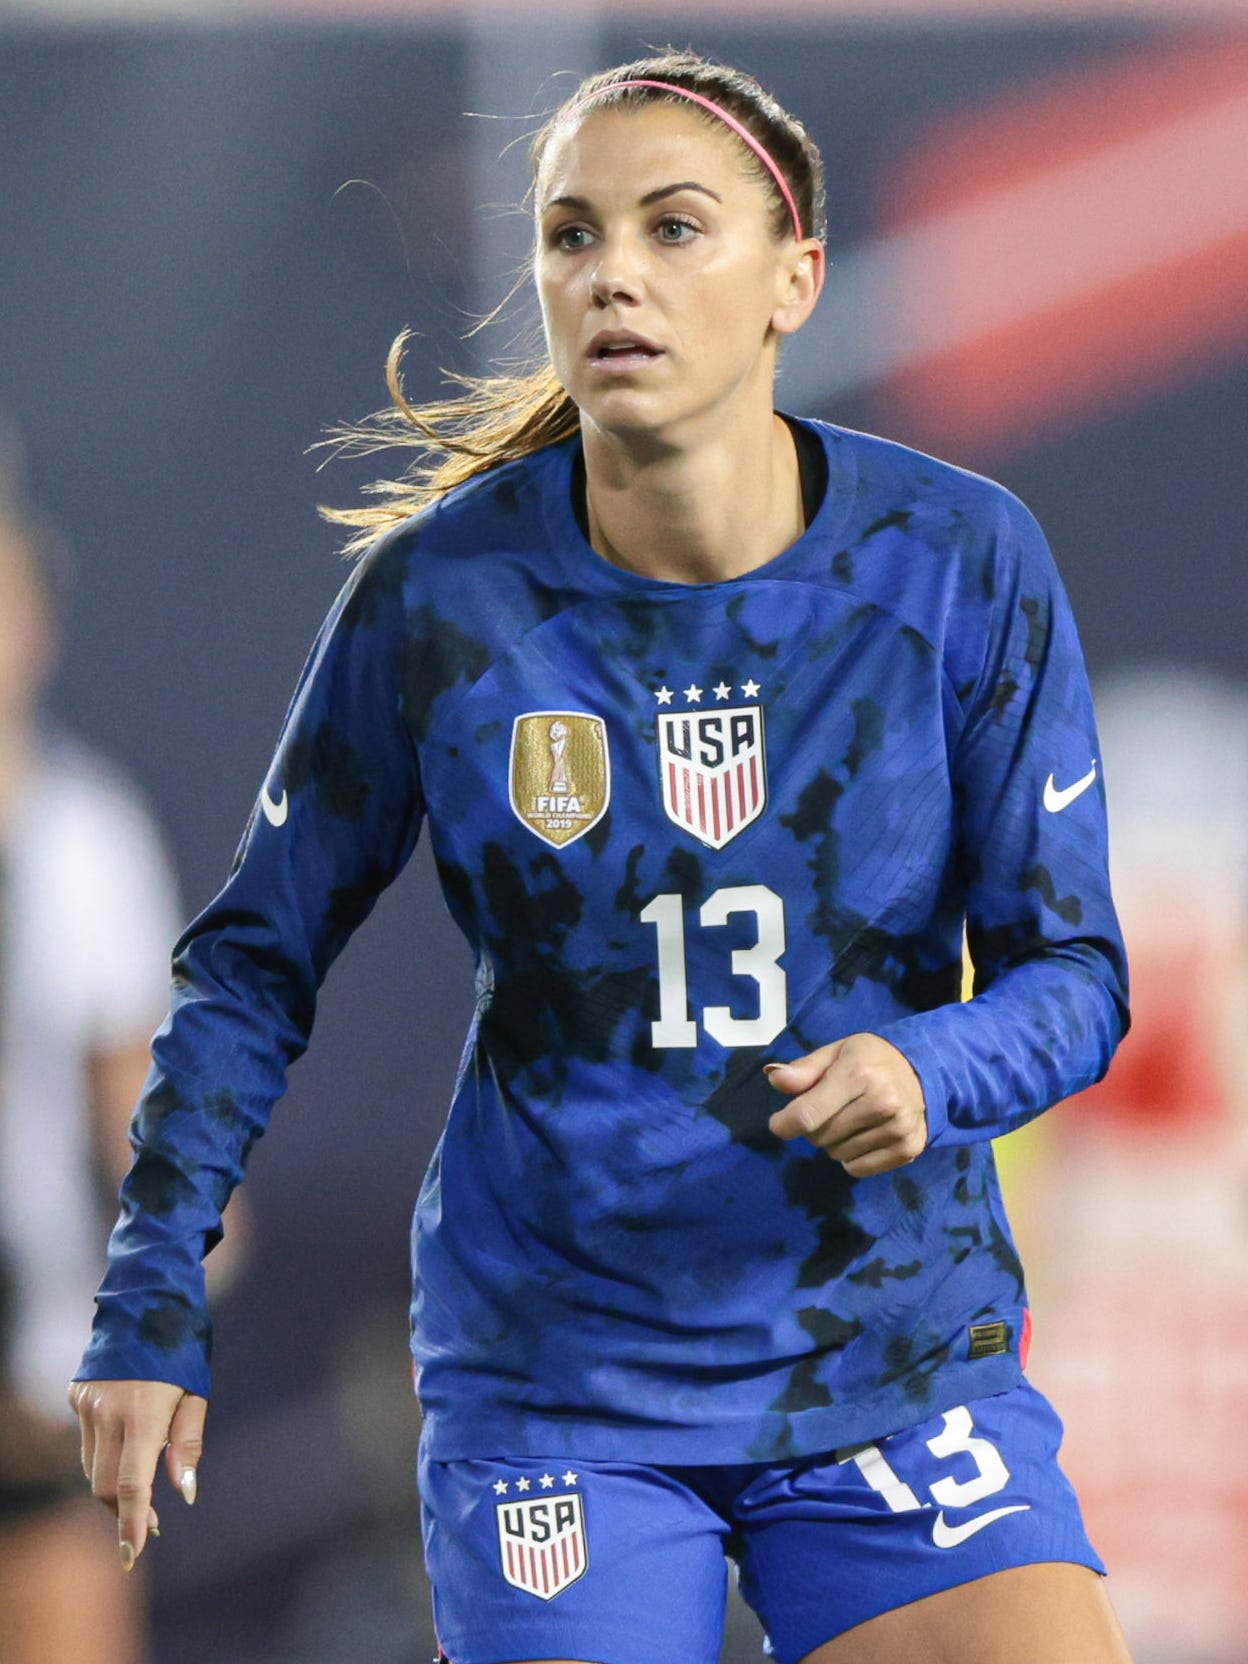 An action image of Alex Morgan playing soccer.